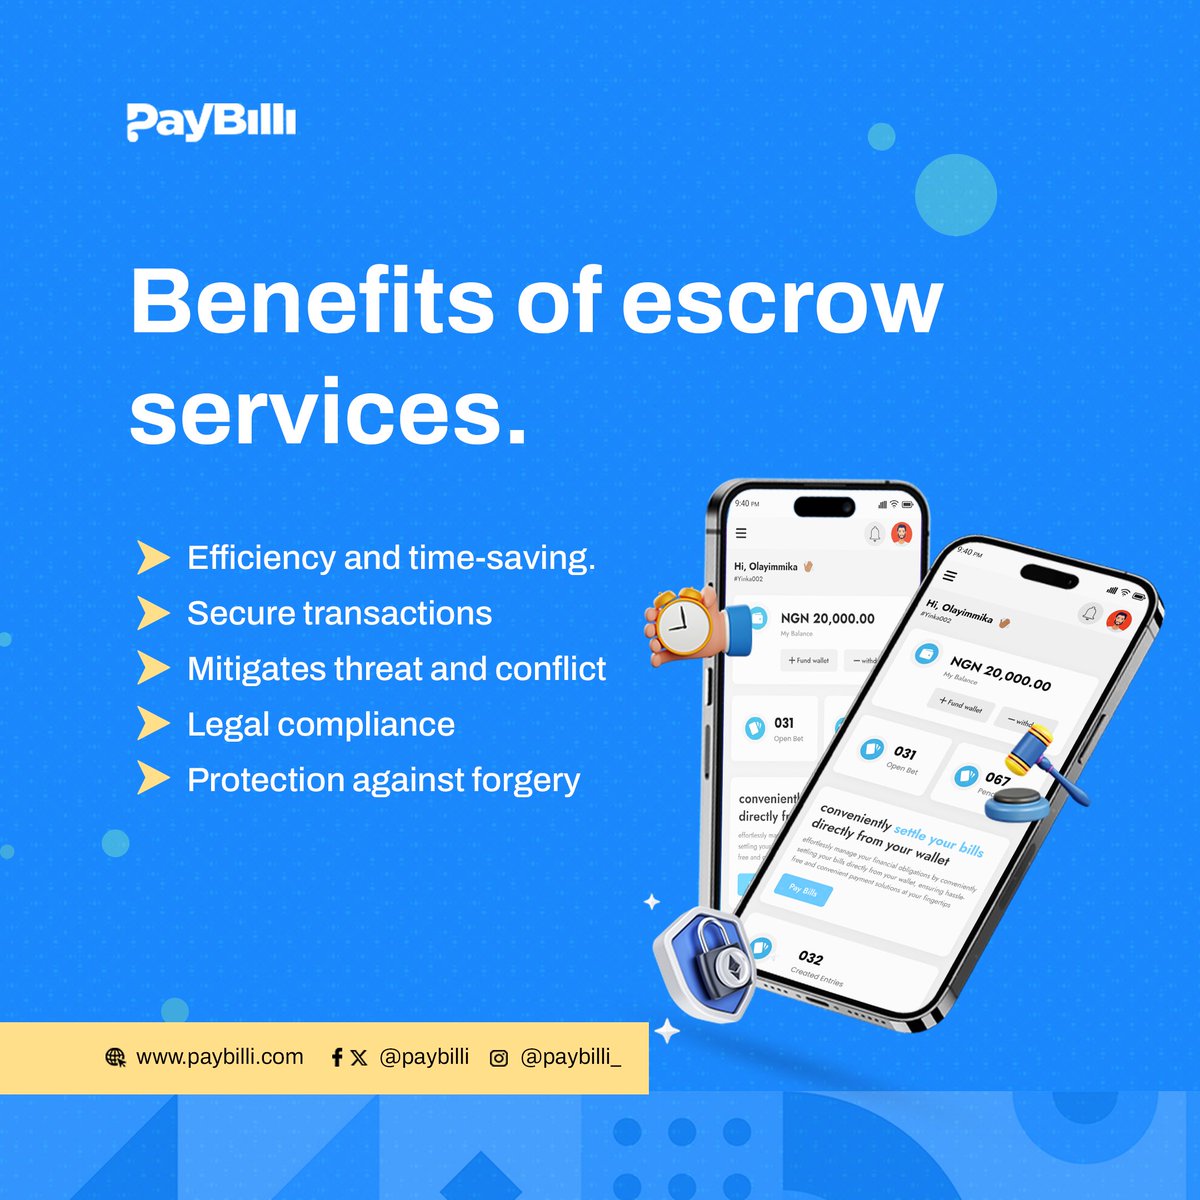 Stay on top of your bills effortlessly and enjoy comfort with all your bill payments.

 We got you covered. 

#paybilli #escrowservices #escrows #bills #payment #secure  #billpayment #billpaymentservices #billsbillsbills